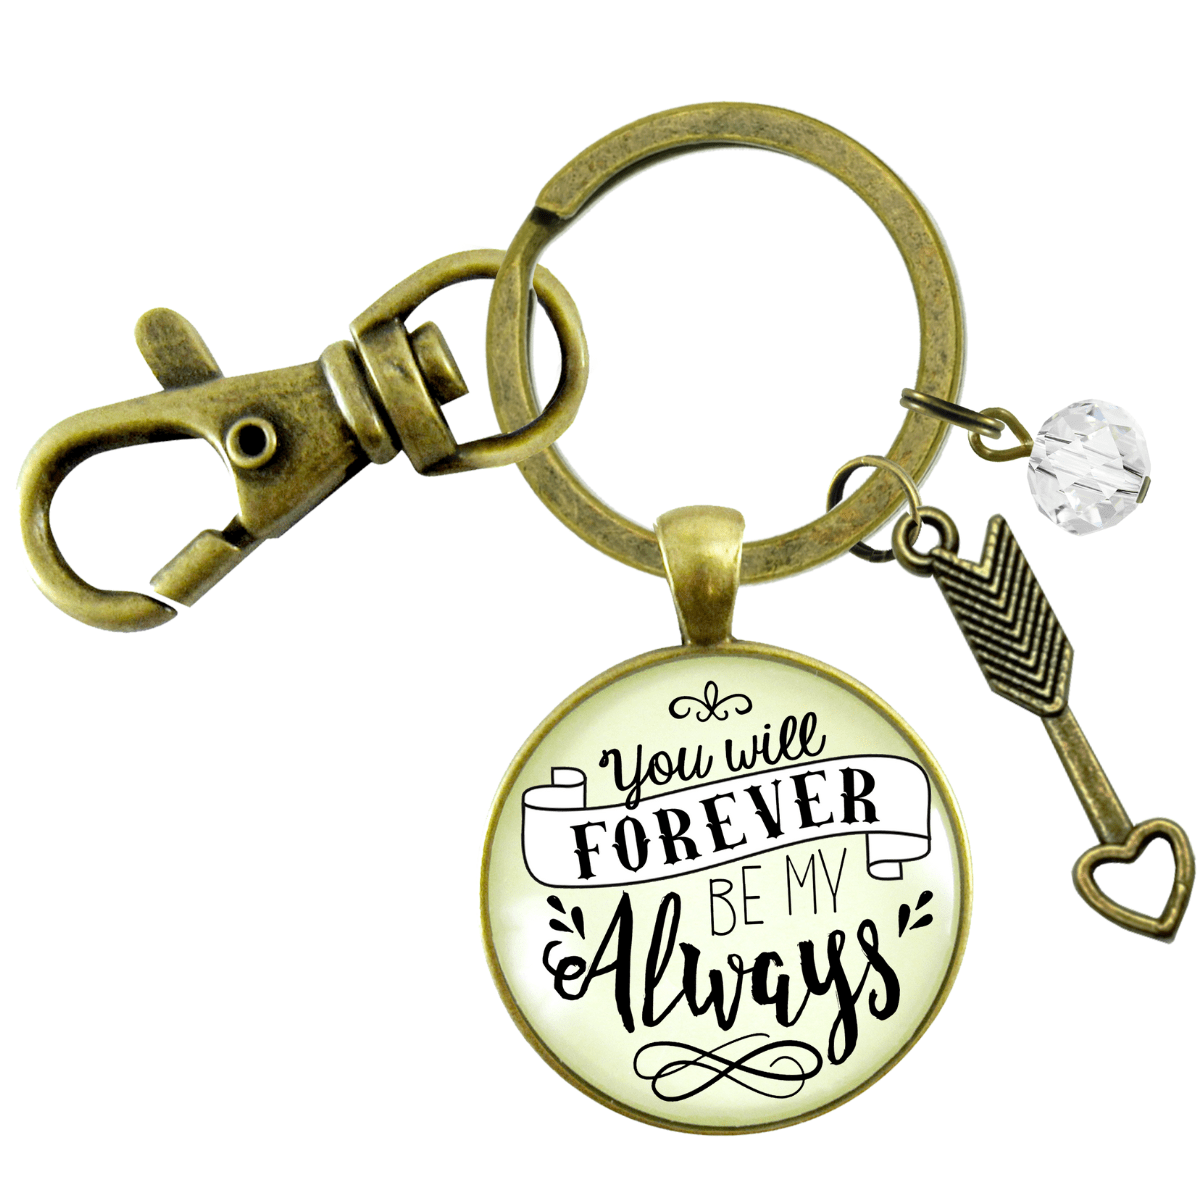 You Will Forever be My Always Love Keychain for Girlfriend Wife Gift - Gutsy Goodness